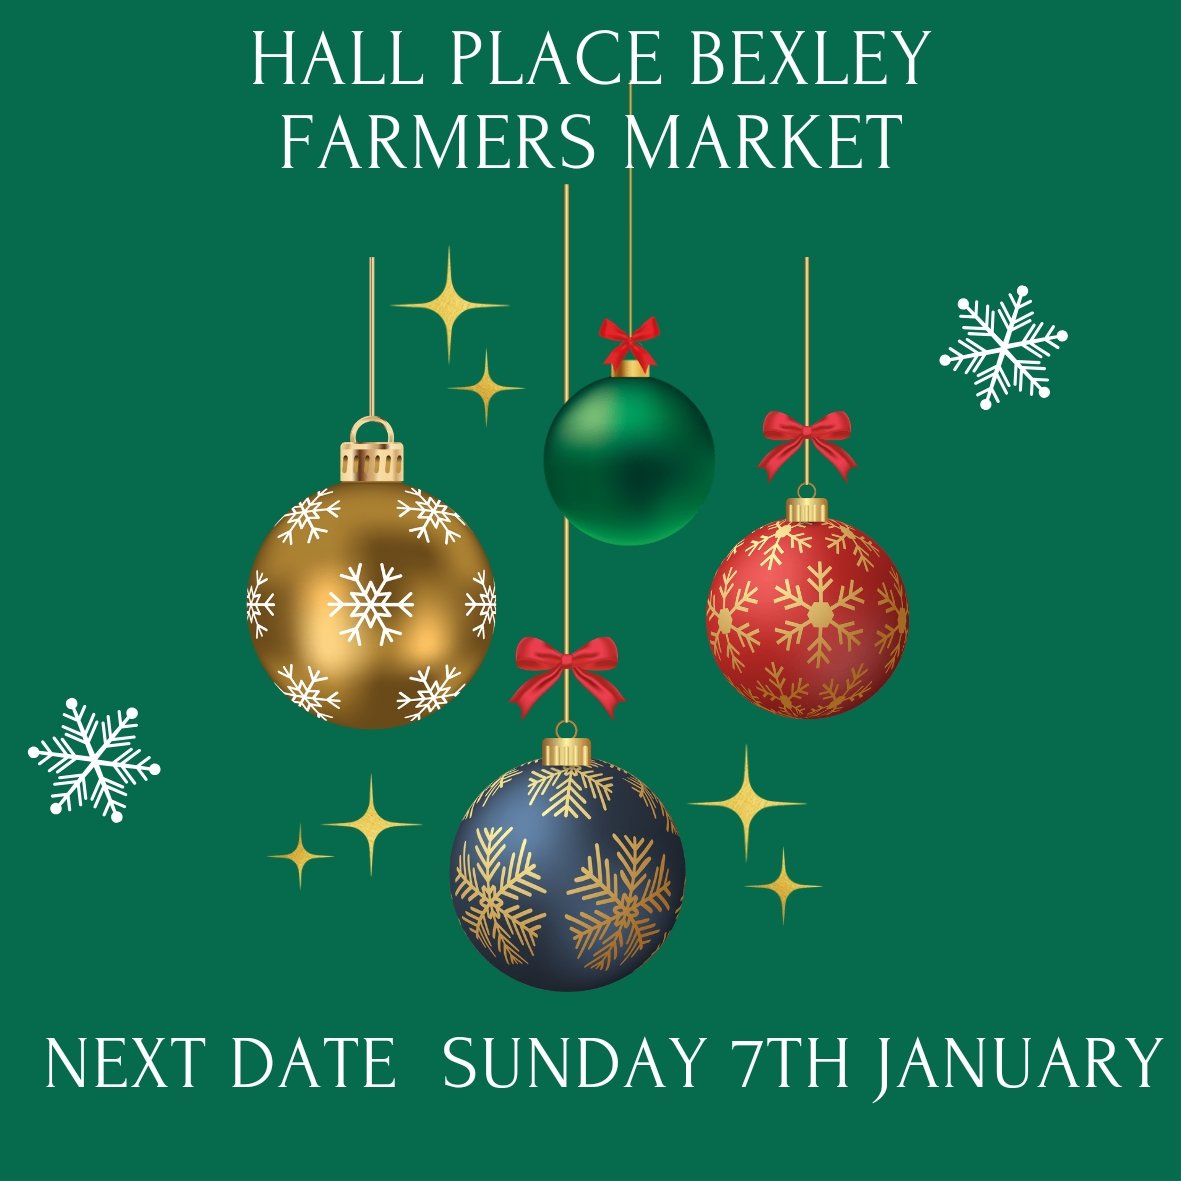 Thank you to everyone who visited the farmers market at Hall Place #bexley yesterday. We hope everyone has warmed up and dried out. Your ongoing support is much appreciated. The next farmers market on a Sunday at Hall Place will be Sunday 7th January 2024.